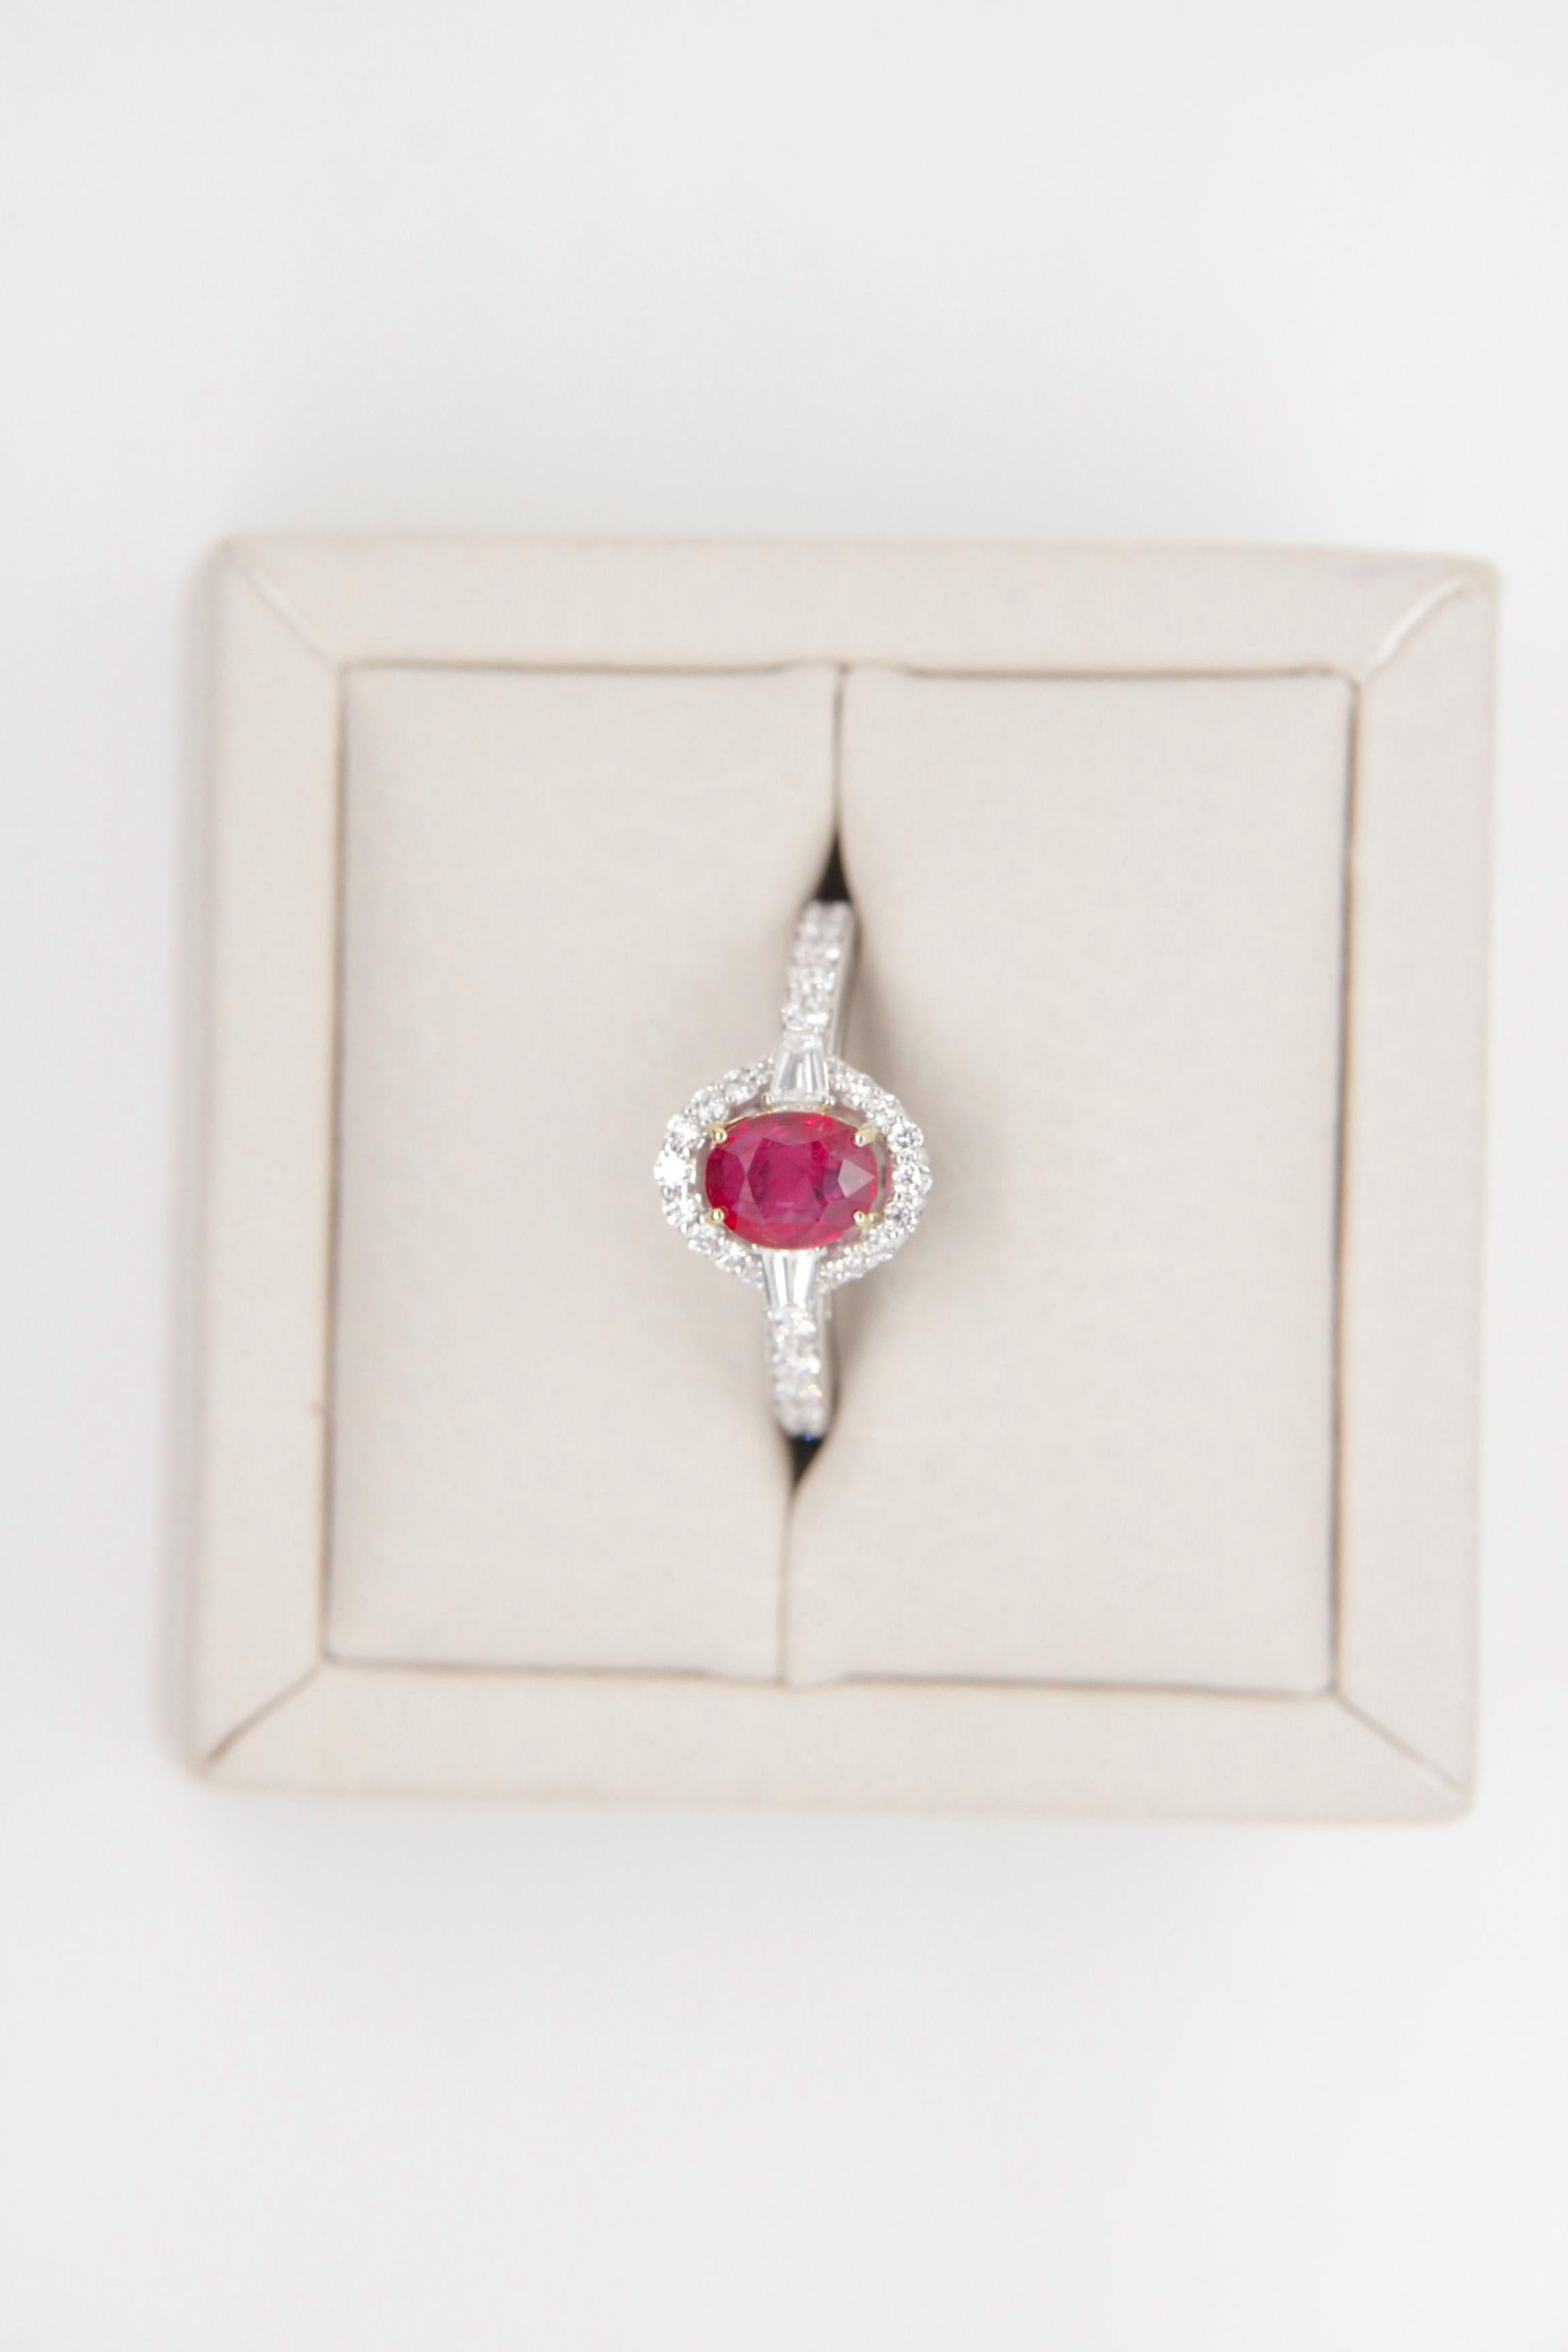 Introducing a timeless treasure from Rewa: a captivating ruby and diamond ring designed for effortless everyday elegance. Crafted with a minimalist and modern aesthetic, this piece seamlessly transitions from boardroom to brunch, adding a touch of